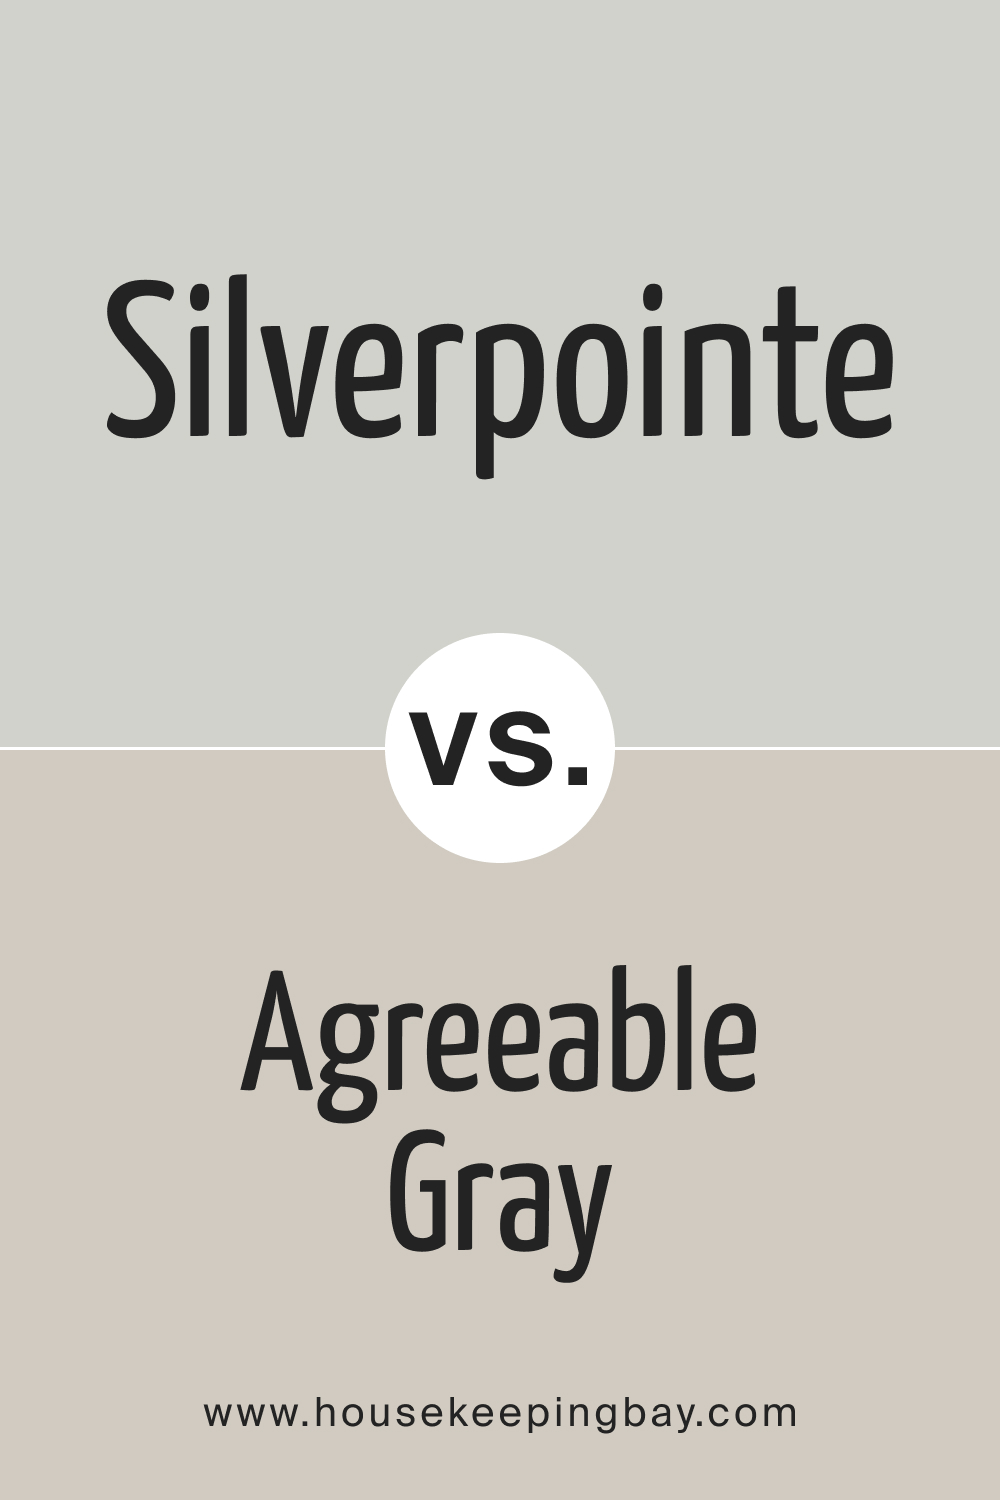 SW Silverpointe vs Agreeable Gray